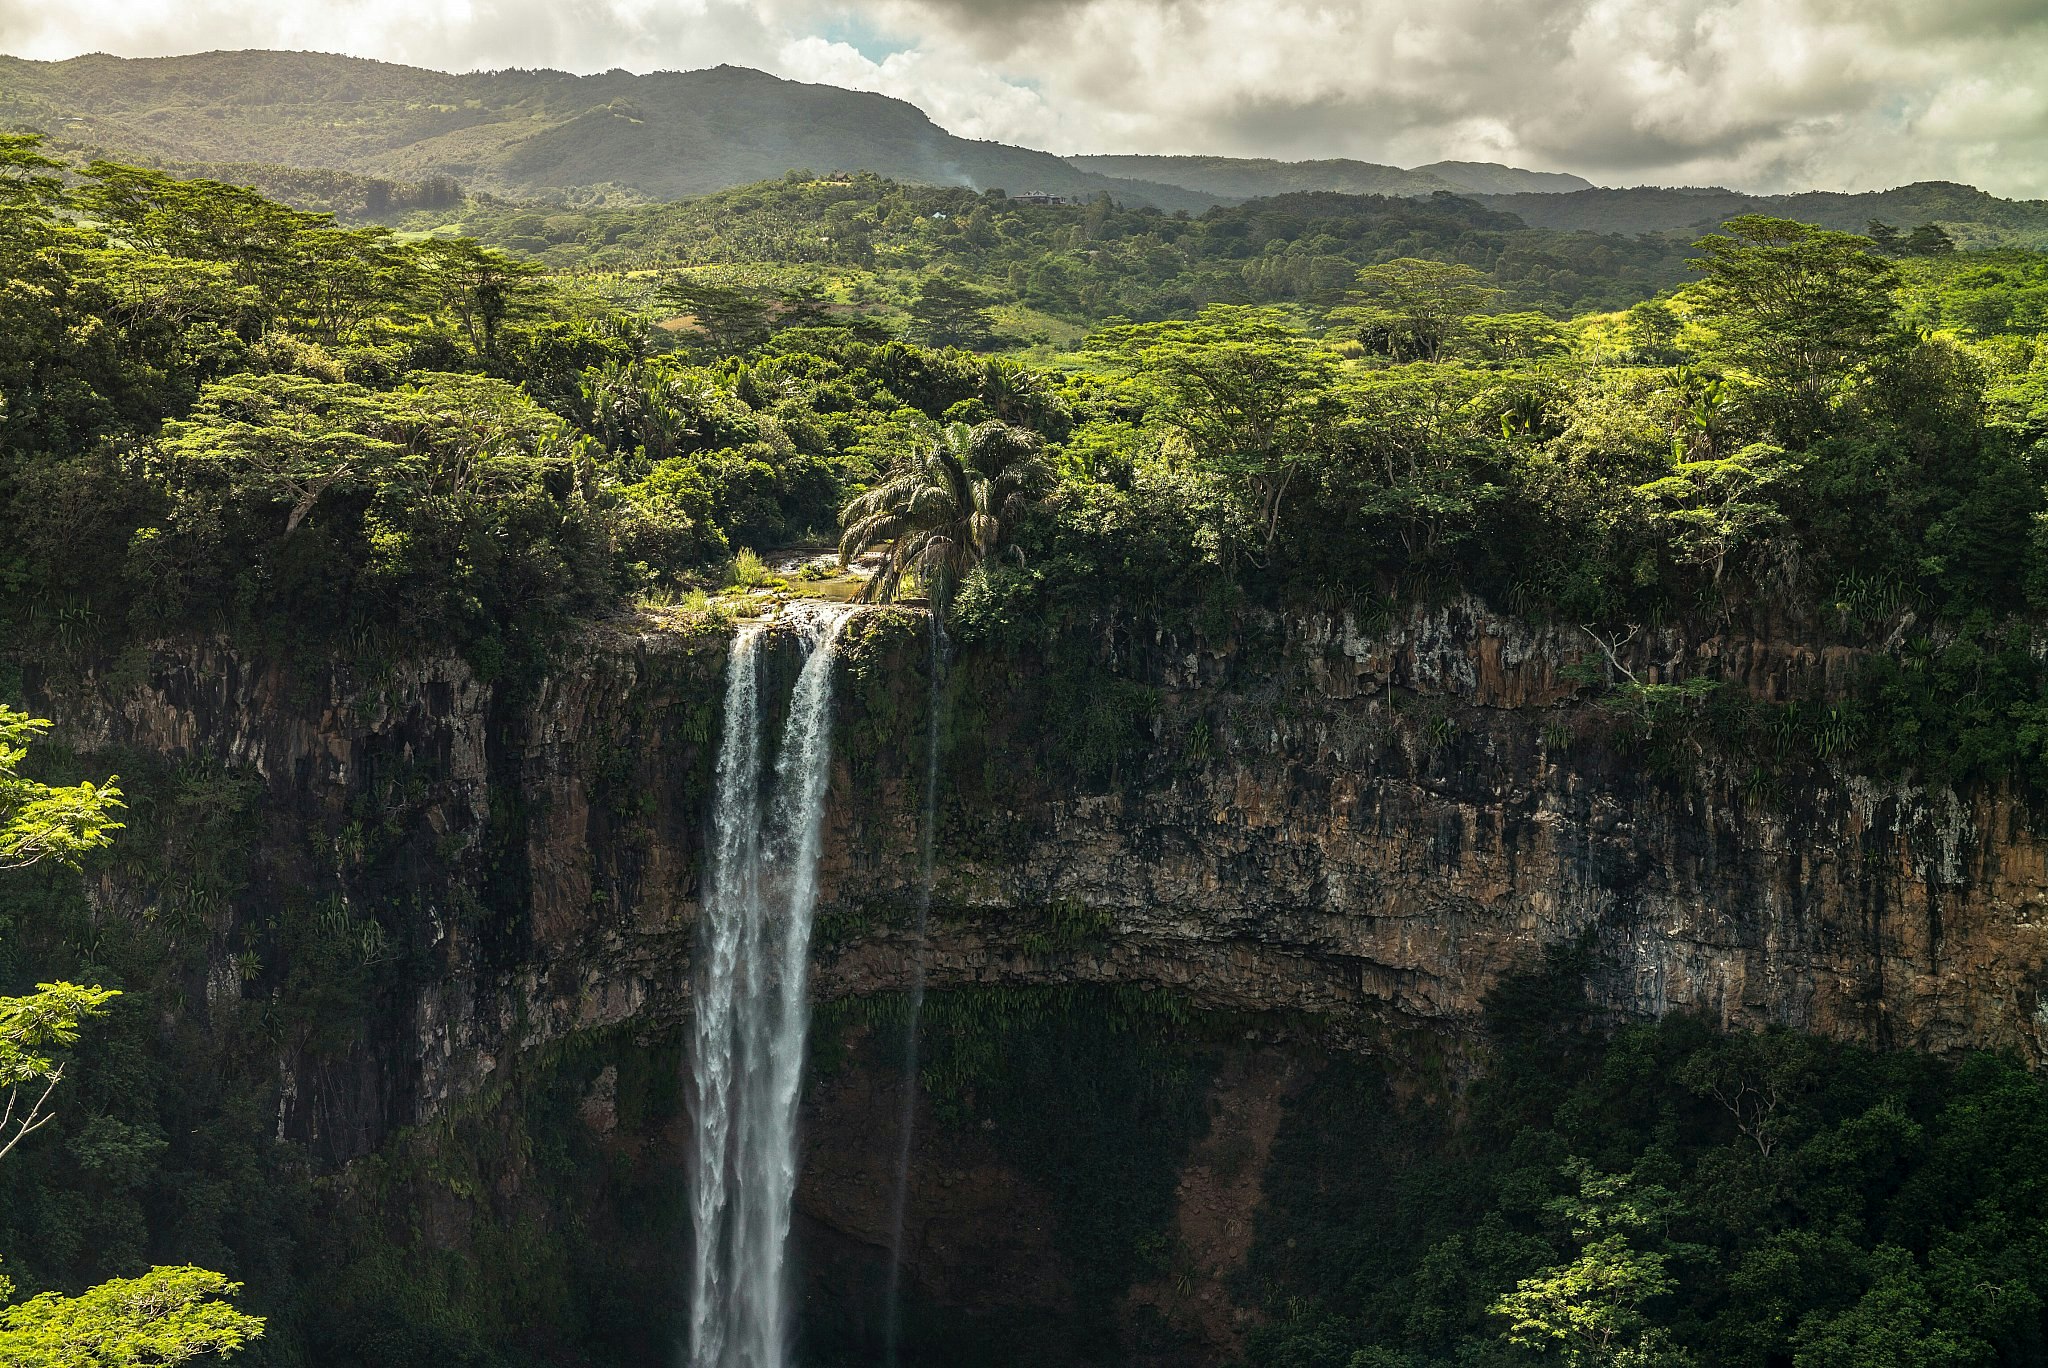 A waterfall cascades over a cliff face in front of verdant forest near Chamarel, Mauritius.